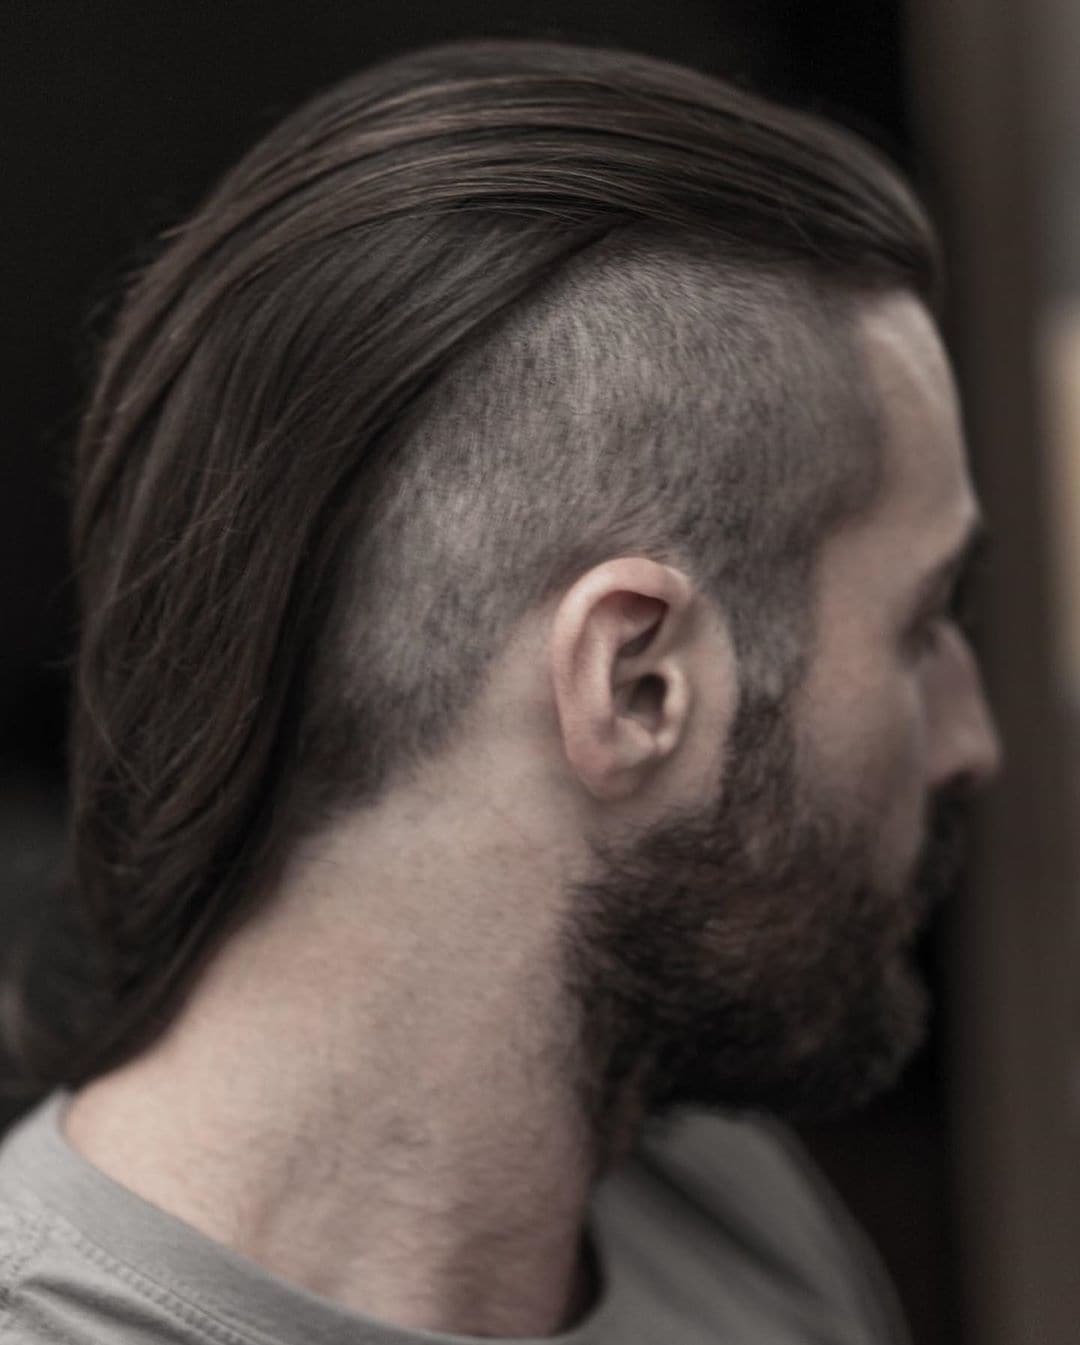 A high-shaved back and sides with longer hair on top creates a striking look